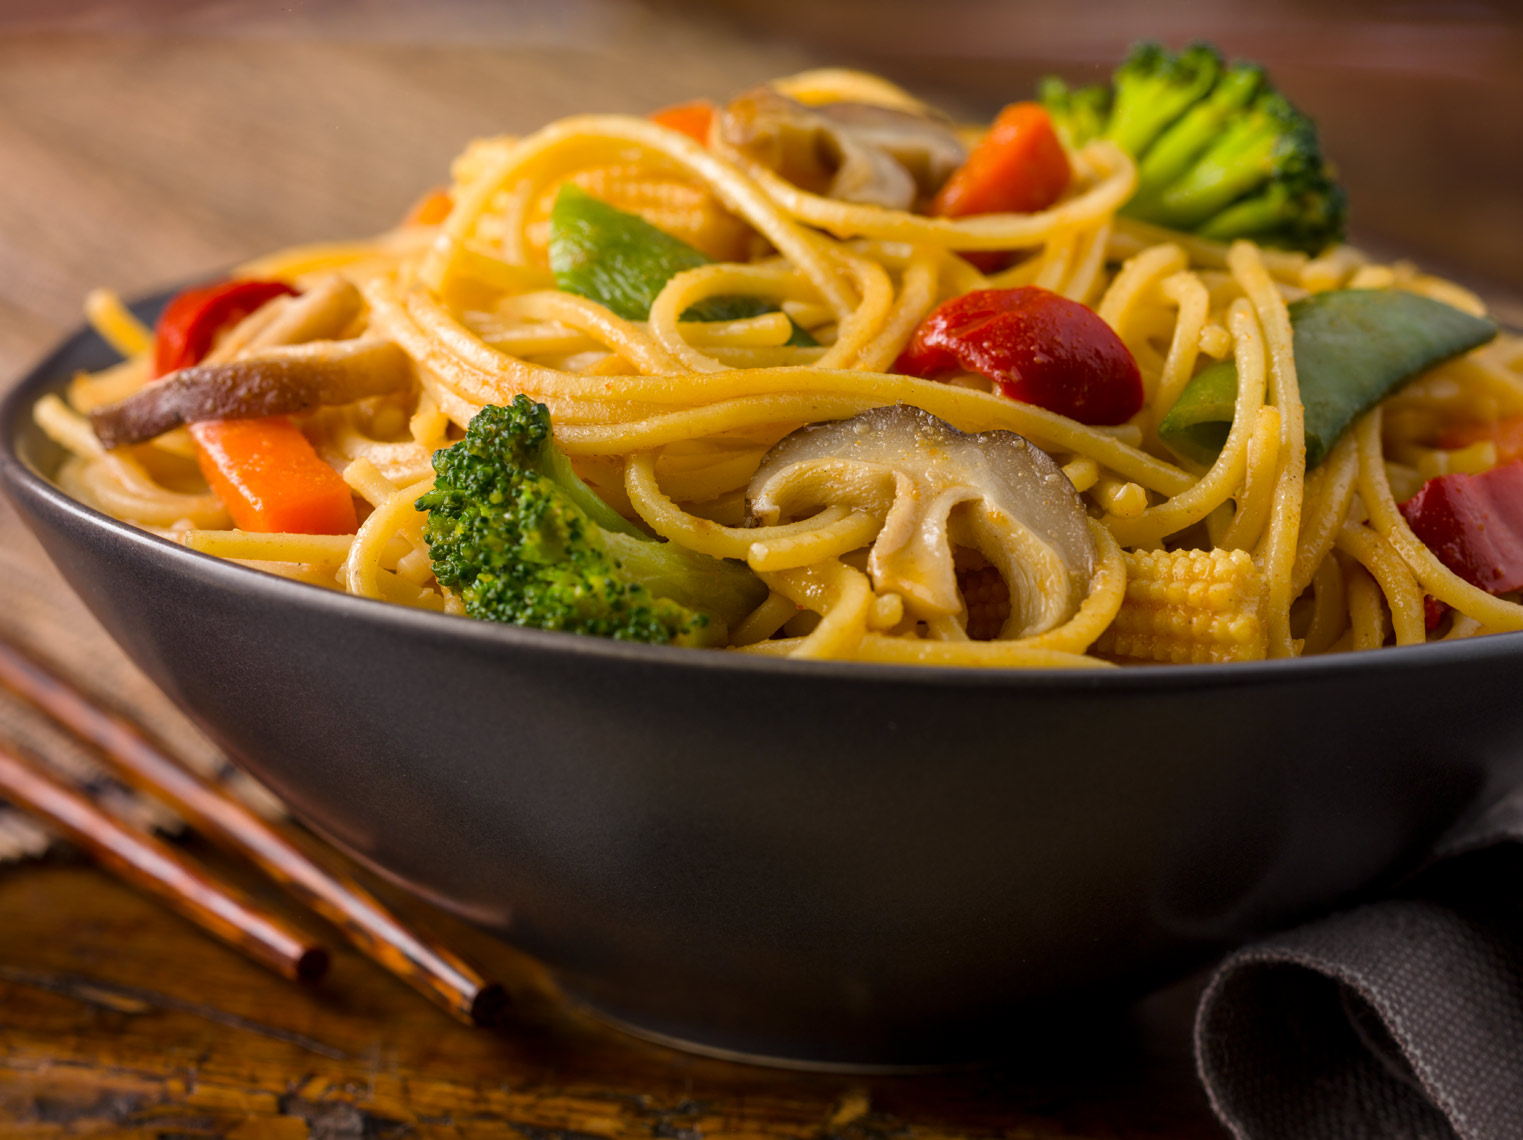 vegetable lo mein with red peppers, carrots, mushrooms, snow peas, baby corn, and broccoli in black bowl on wood surface with chopsticks Fantich studio food photography.